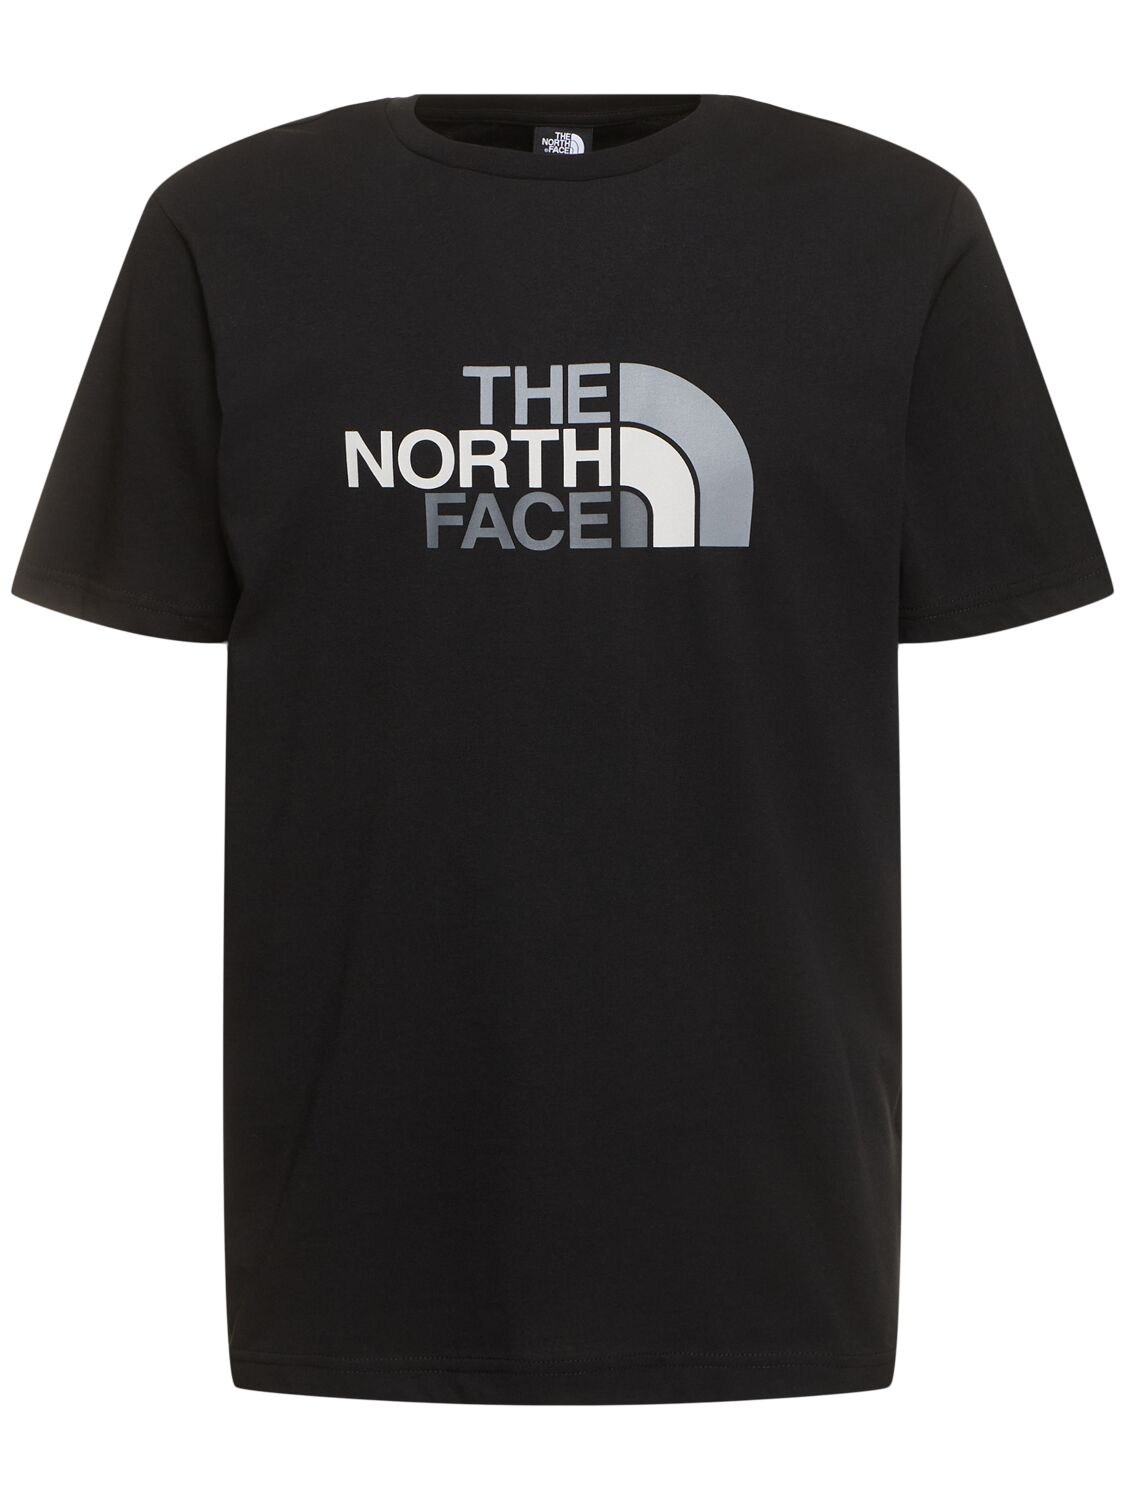 The North Face Black And White Easy Bambino T Shirt